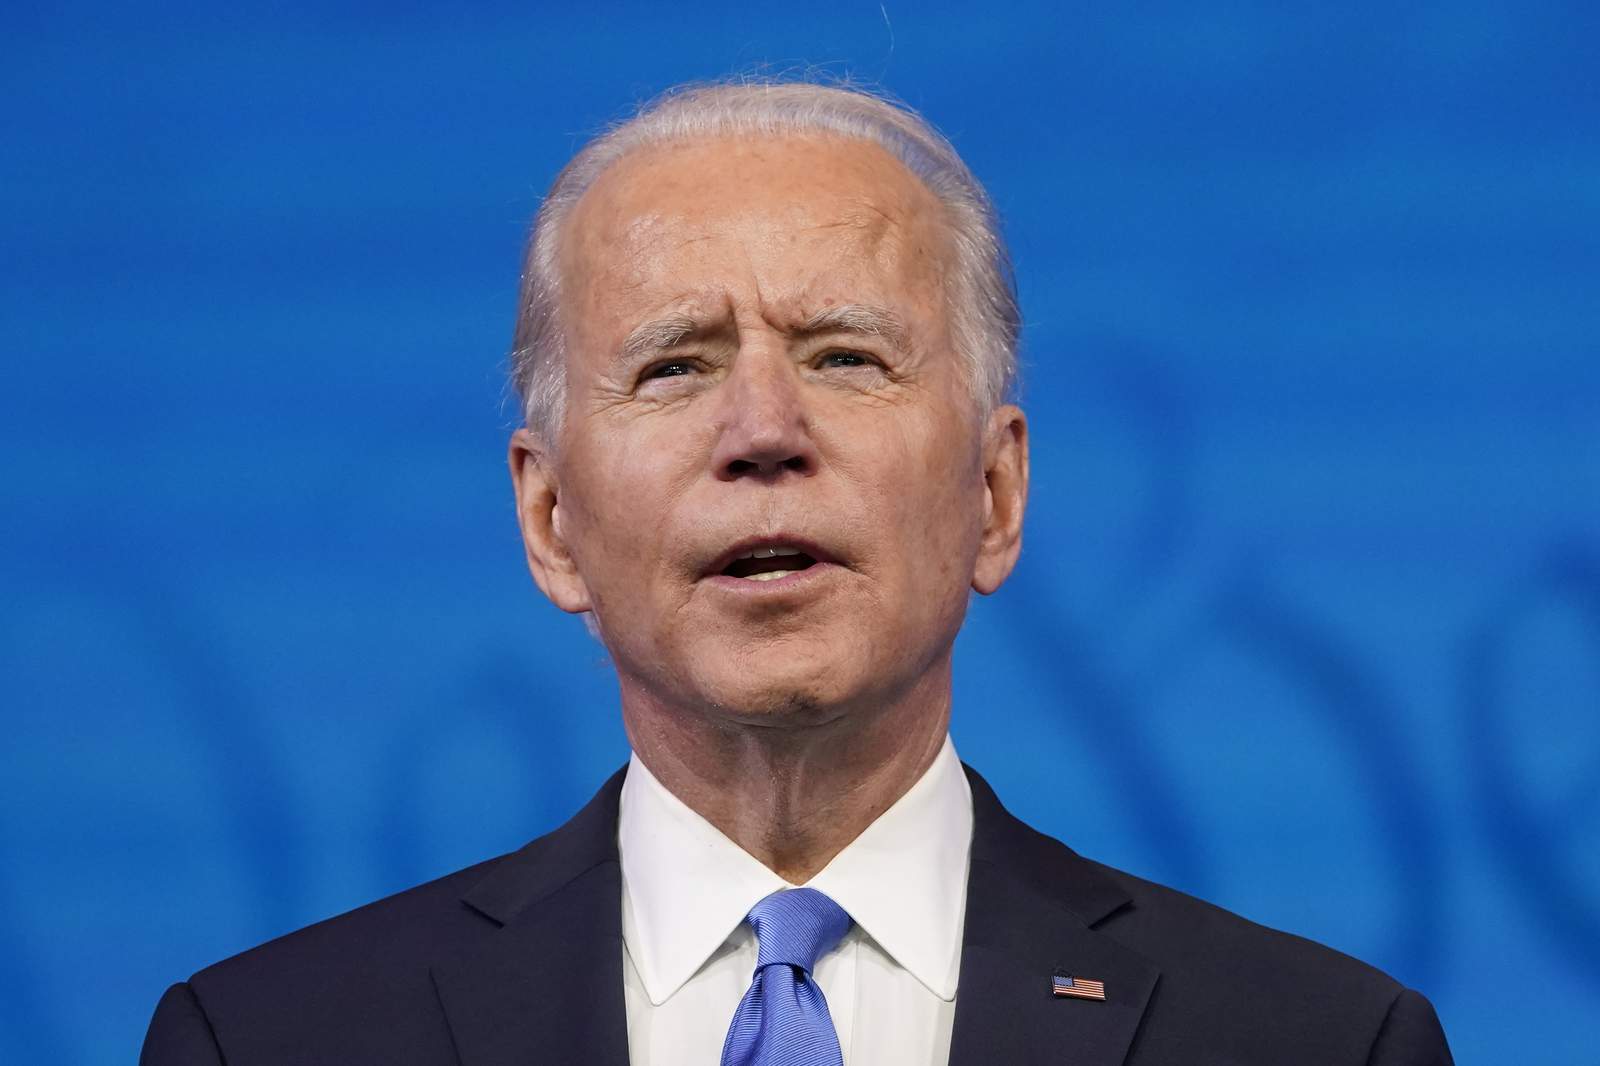 'Democracy prevailed': Biden aims to unify divided nation